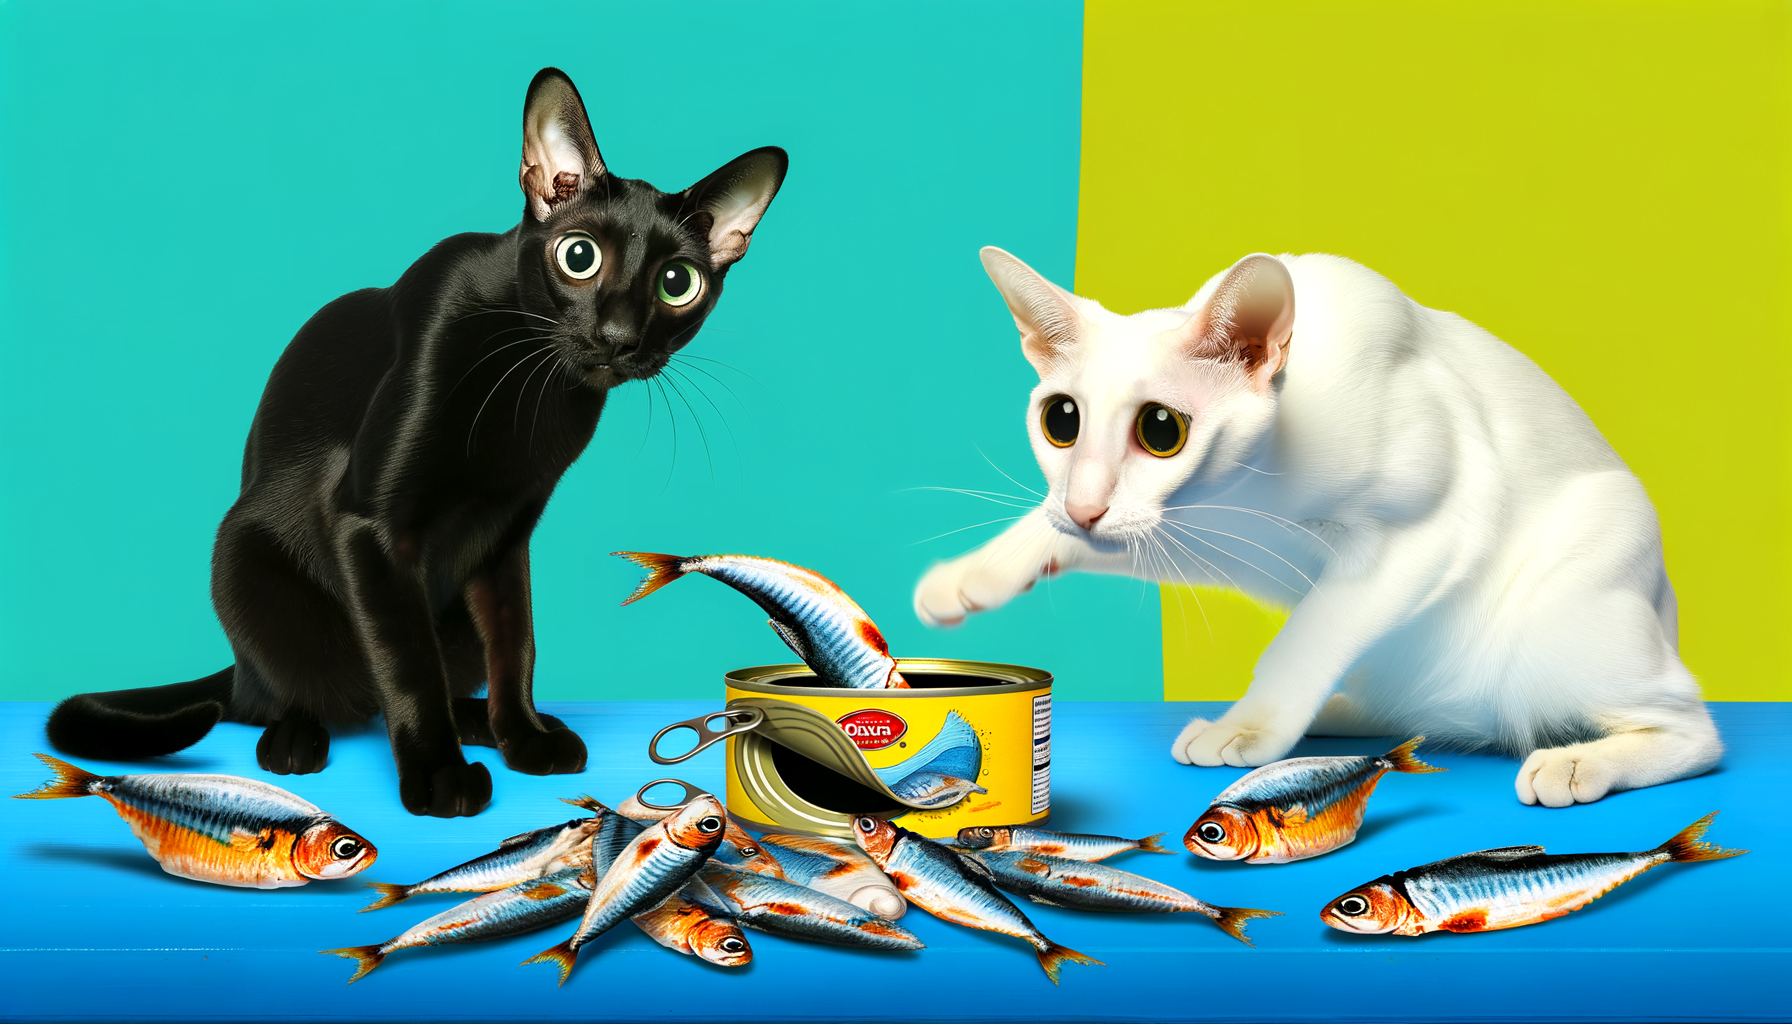 "Unraveling the Anchovy Enigma: Do Cats Really Enjoy These Salty Fish?"